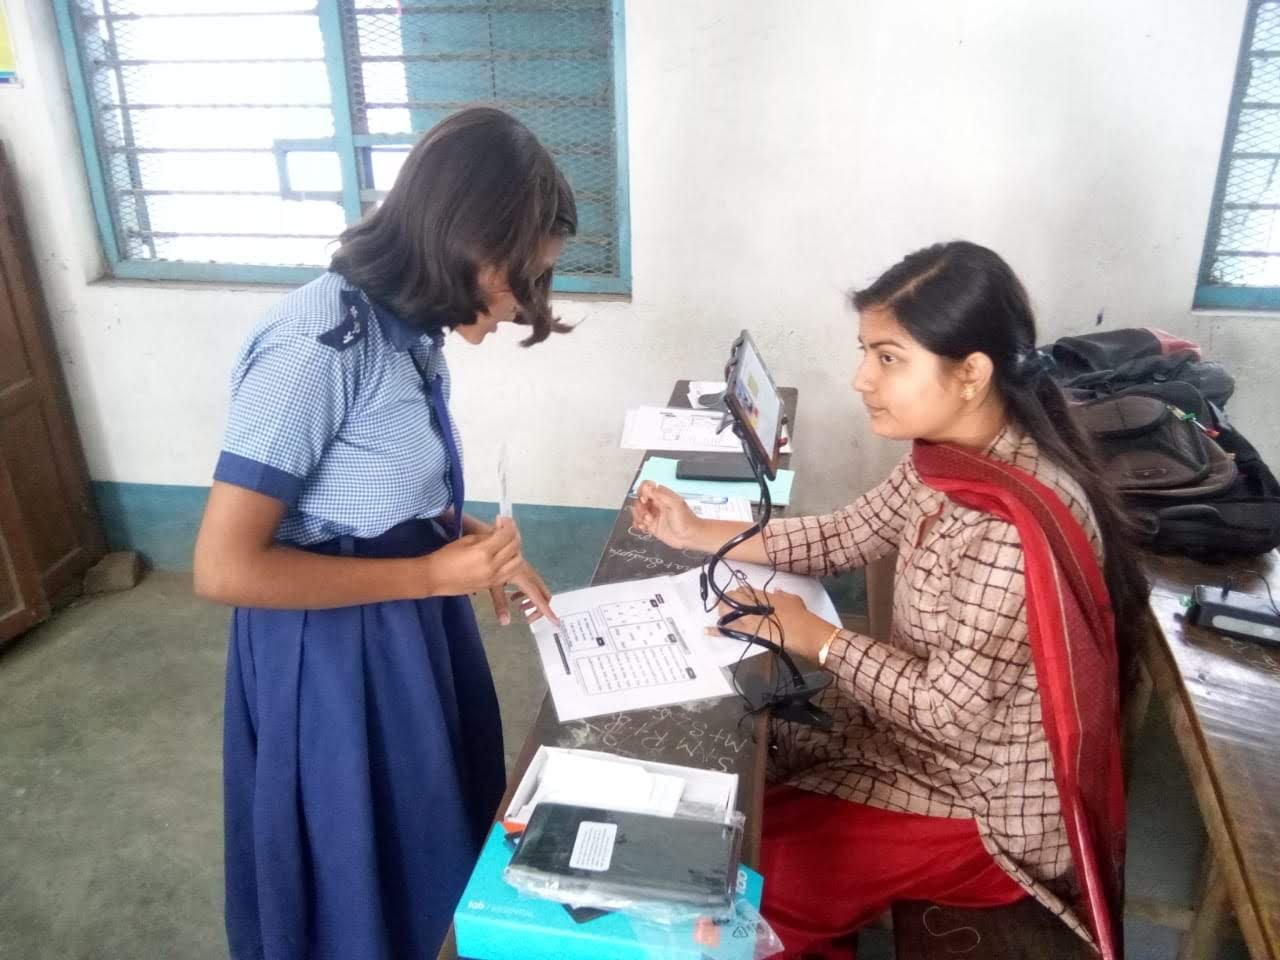 Project Learn To Read by Krishworks Technology and Indusnet Foundation in Collaboration with Karimpur Girls High School